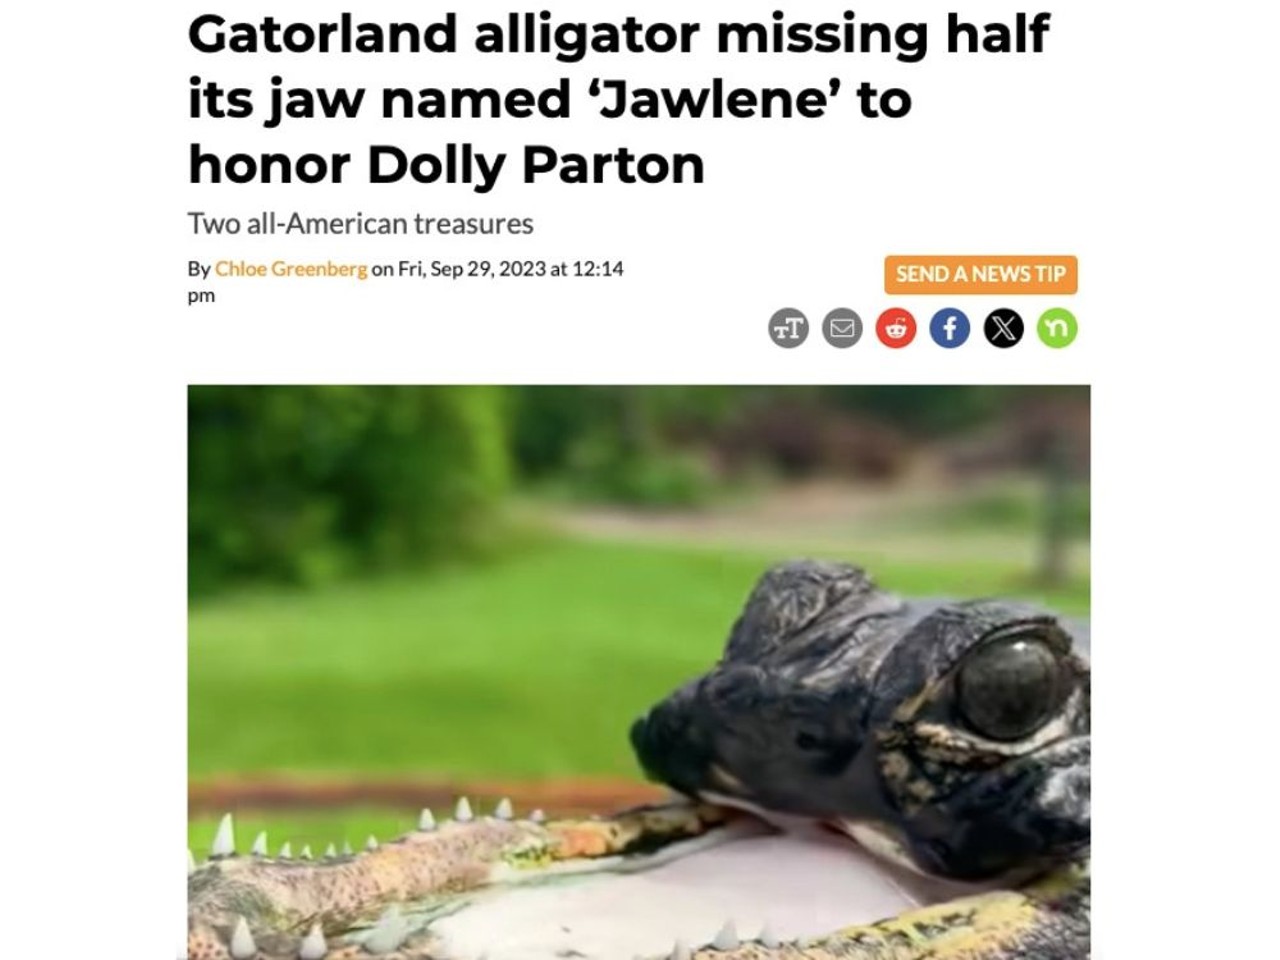 "This little gator is an absolute treasure ... but another American treasure is Dolly Parton," says Mark McHugh, Gatorland CEO, in a video posted to Facebook. "Dolly Parton all day!" echoes wildlife educator Savannah Boan before breaking into song. Read full article